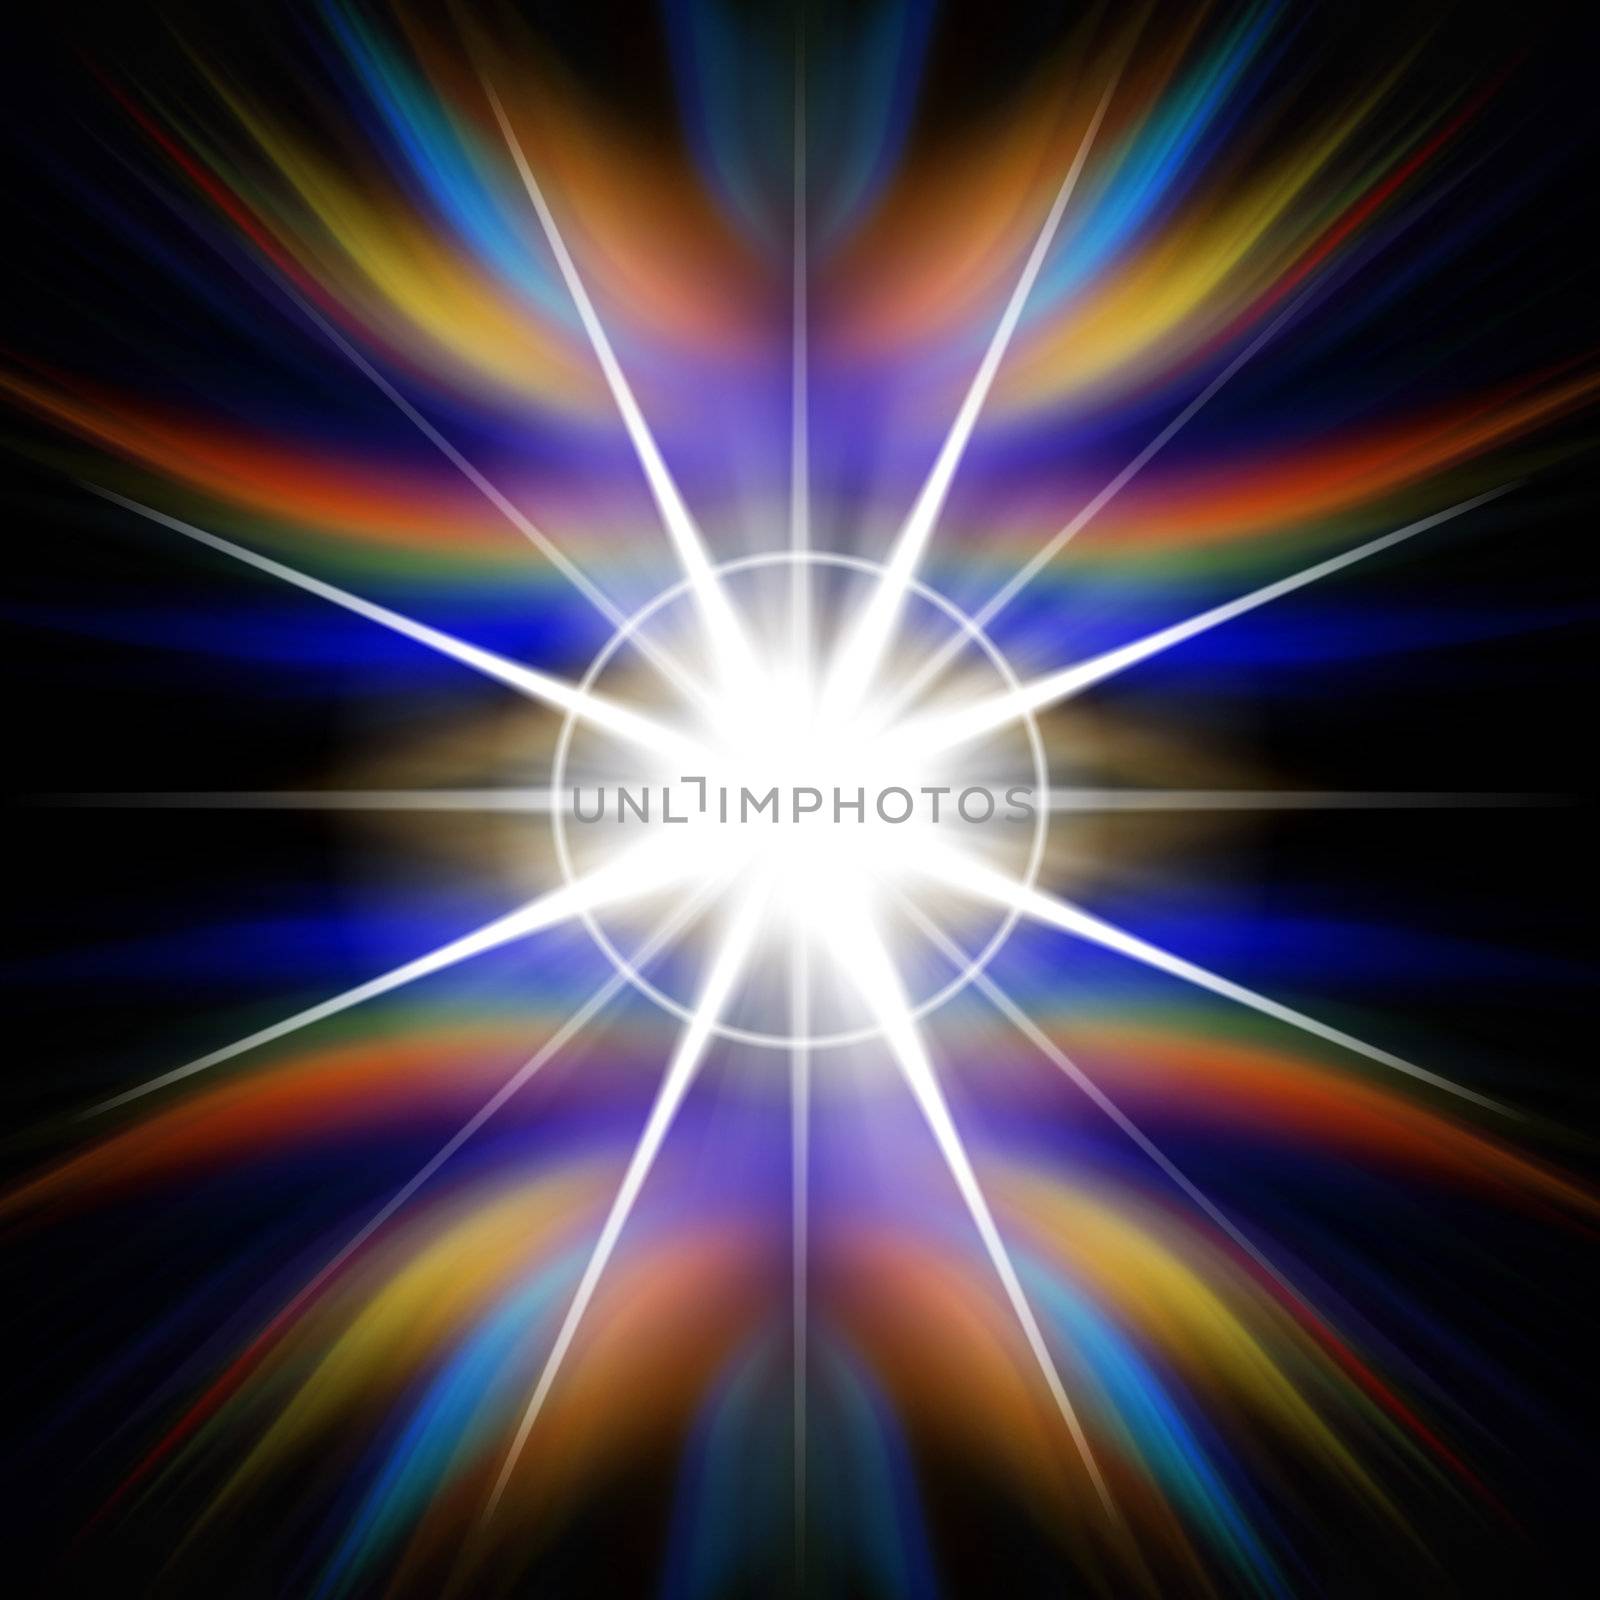 Bright rainbow colored flash of light or lens flare burst over a black background.